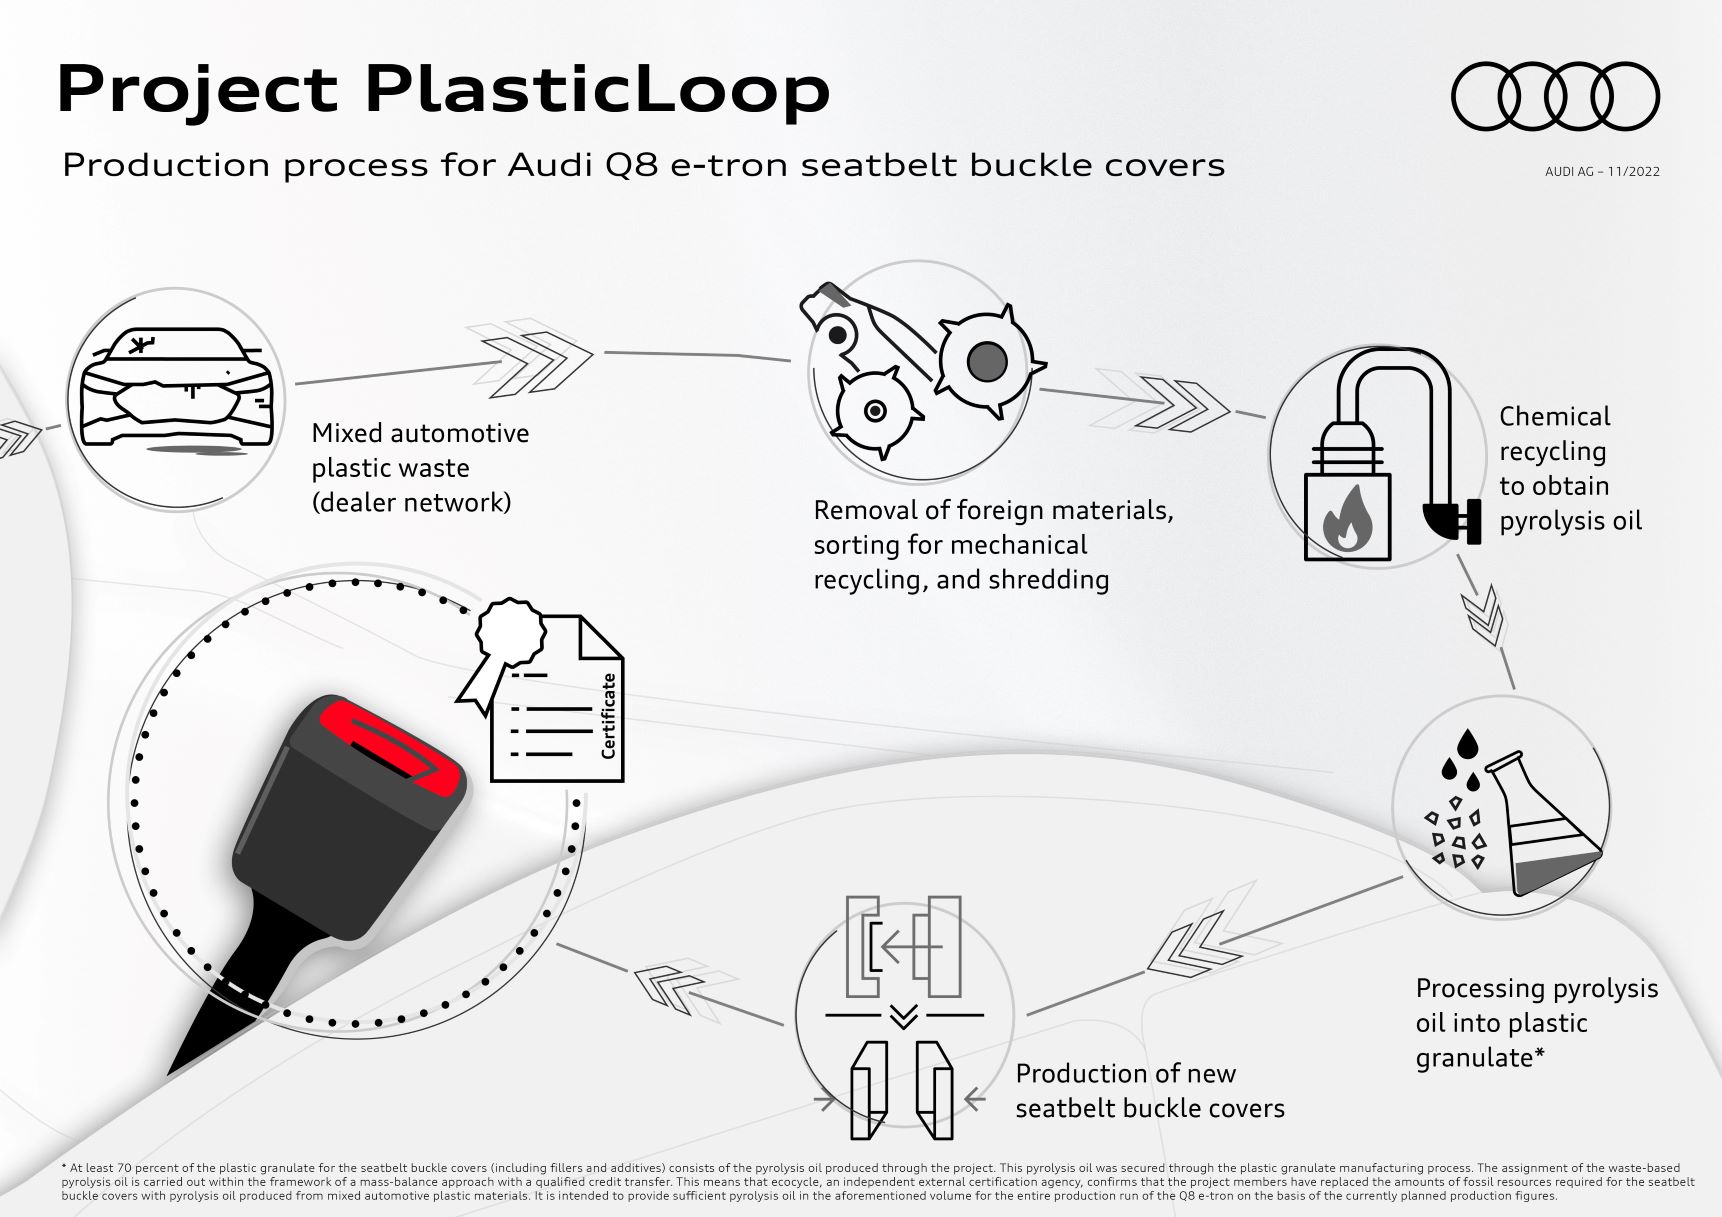 Audi's plan for making seatbelt covers out of recycled plastics